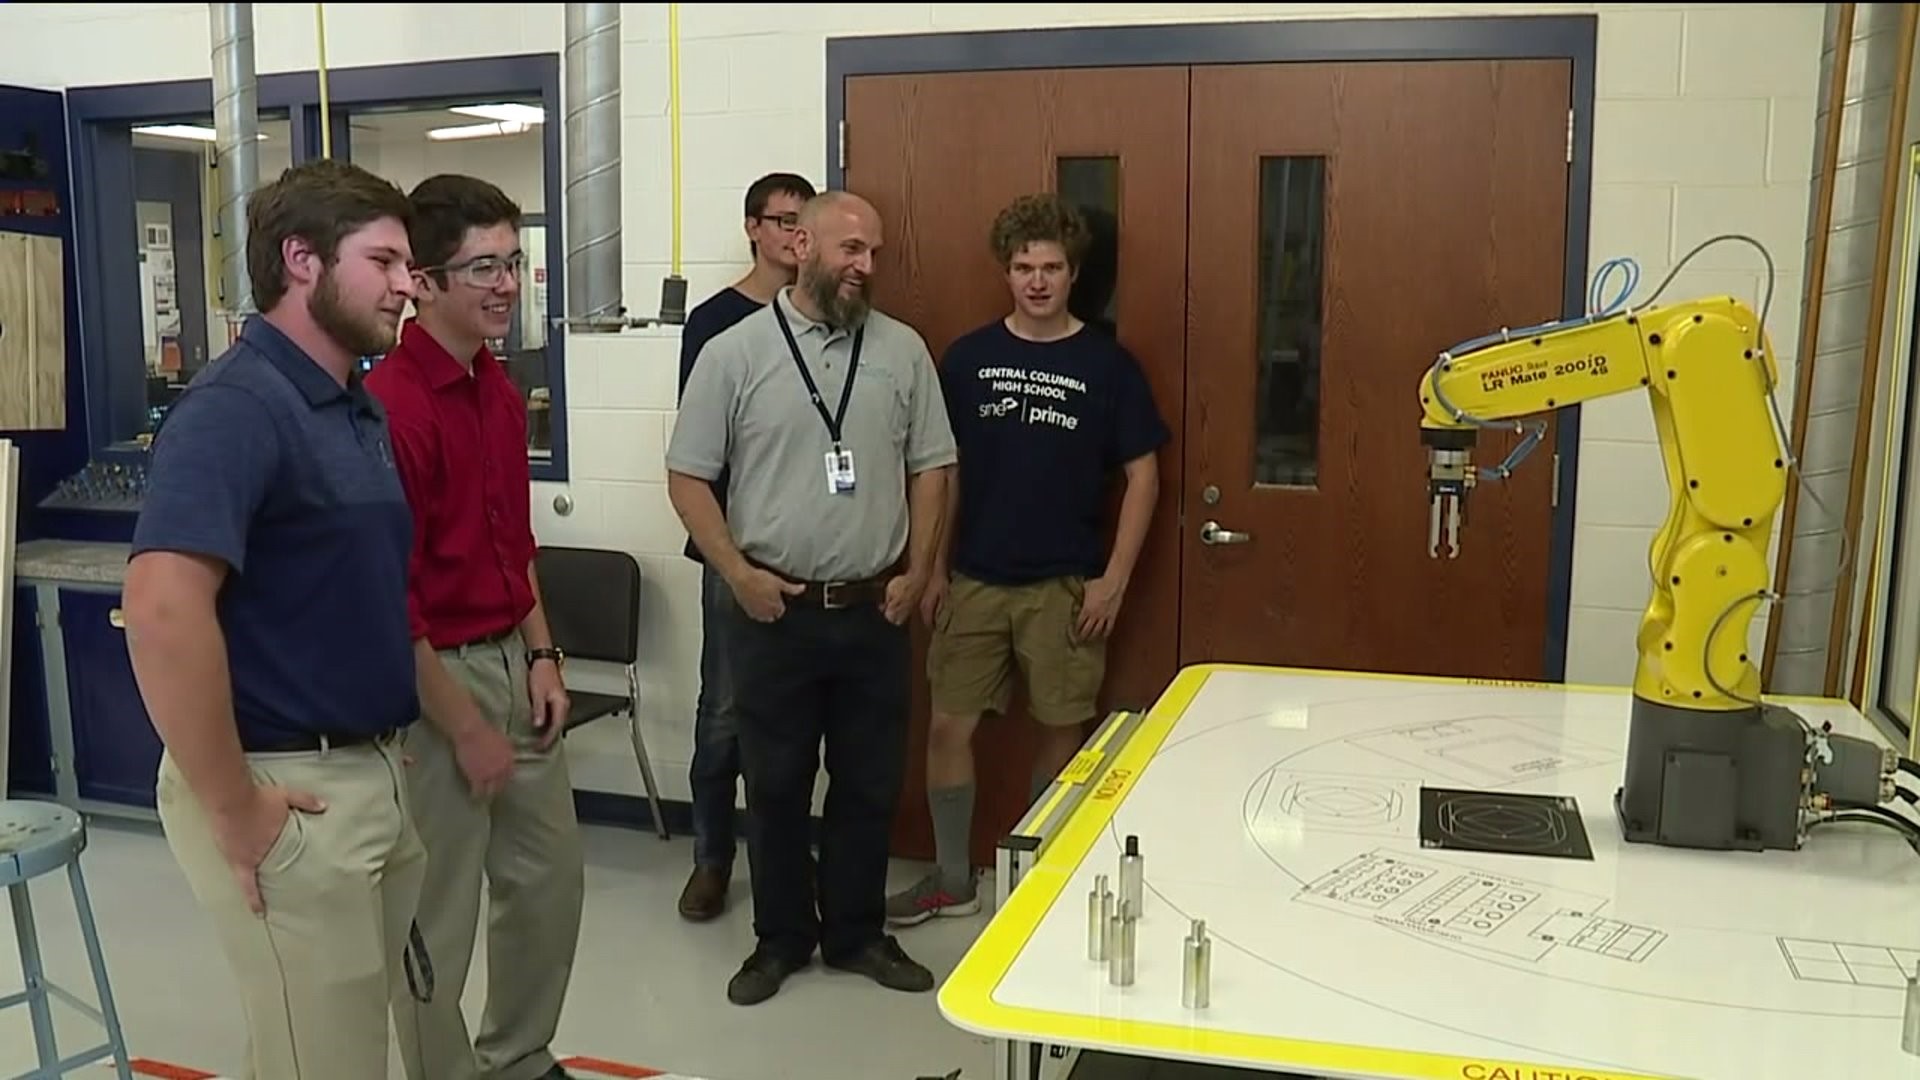 Students Discuss Manufacturing Jobs